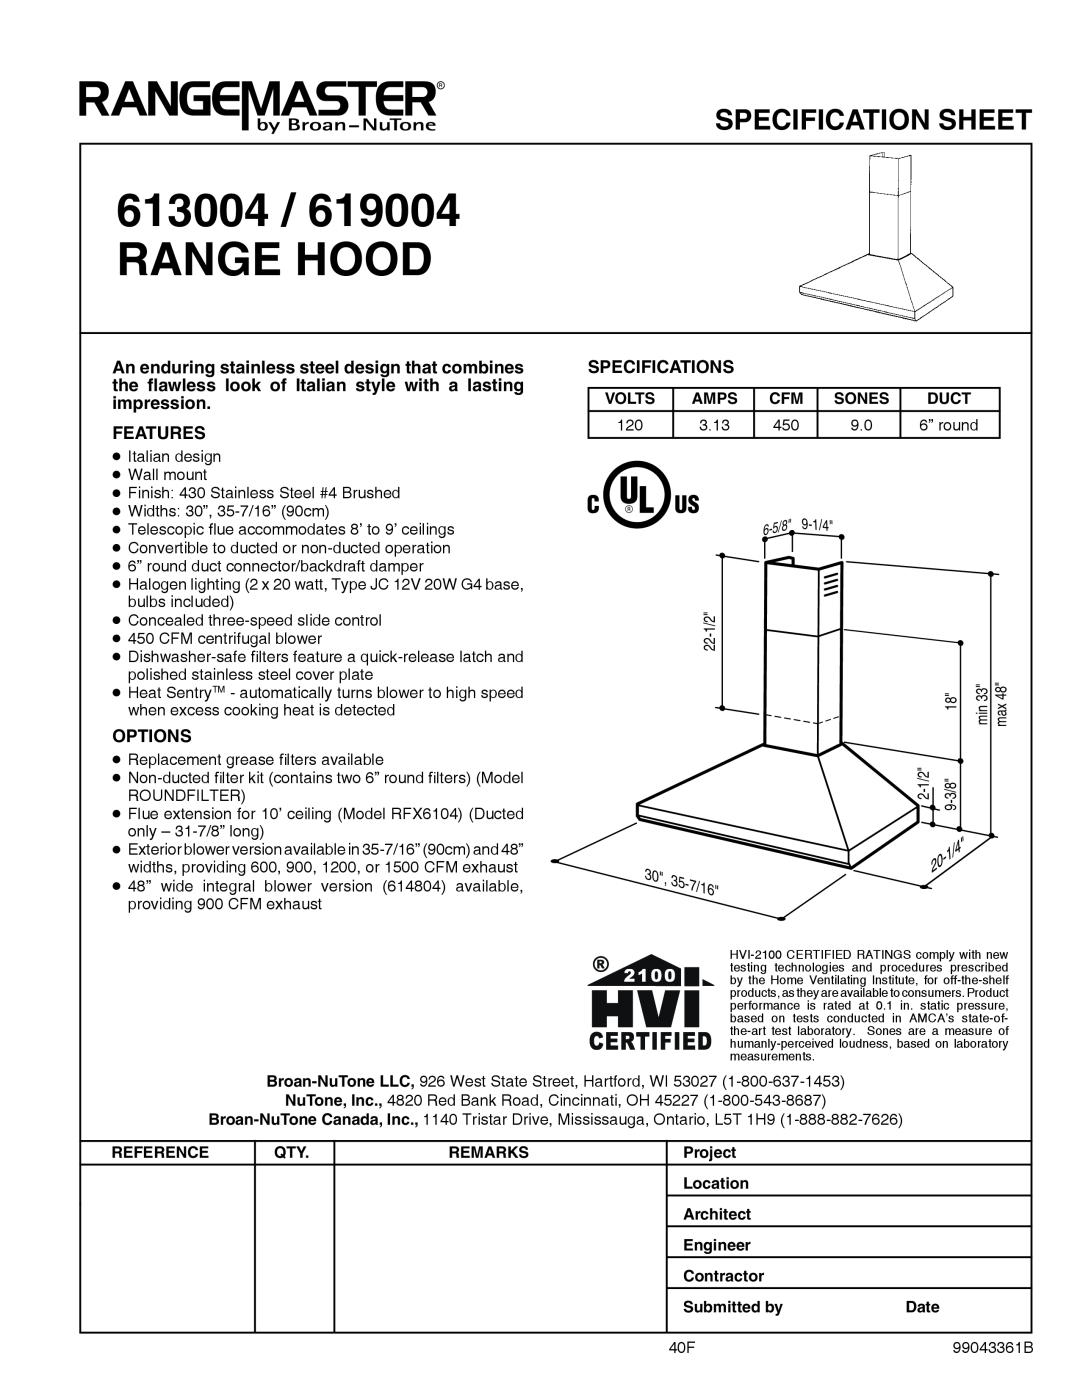 Broan 613004, 619004 specifications Range Hood, Specification Sheet, 30, 35-7/16, Features, Options, Specifications 